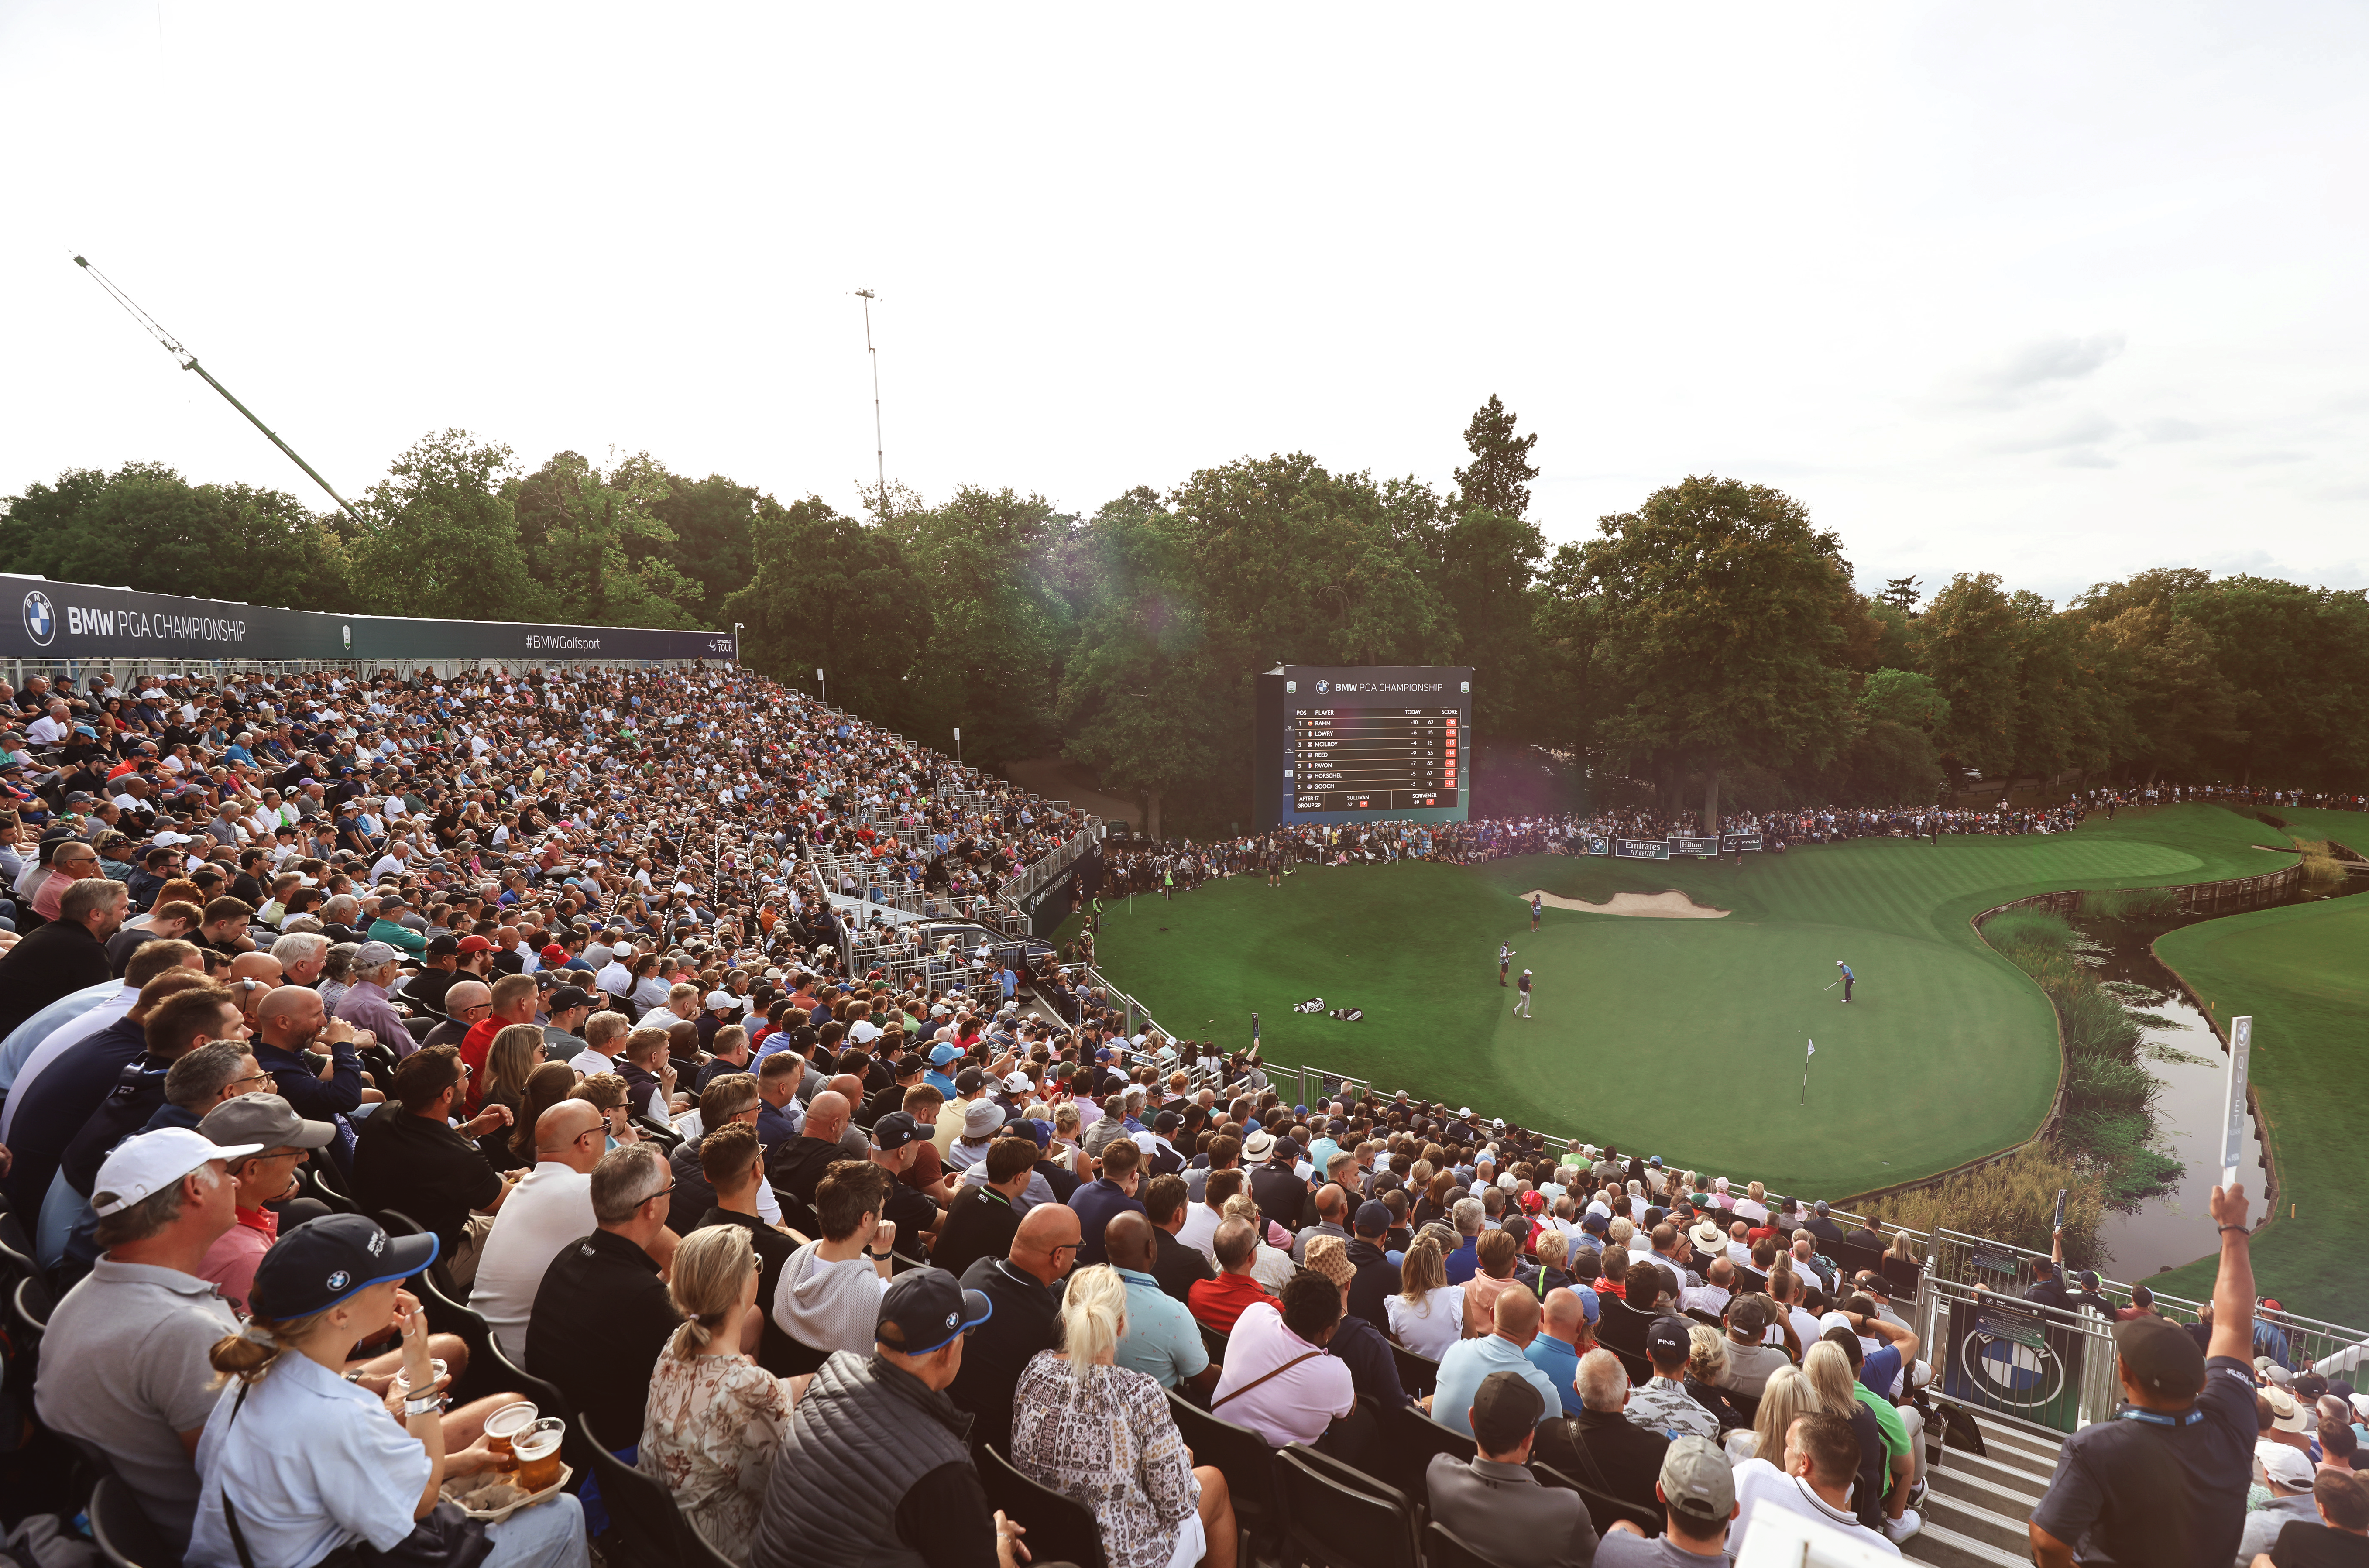 A packed grandstand watches on as players play on the green at the 2022 BMW PGA Championship